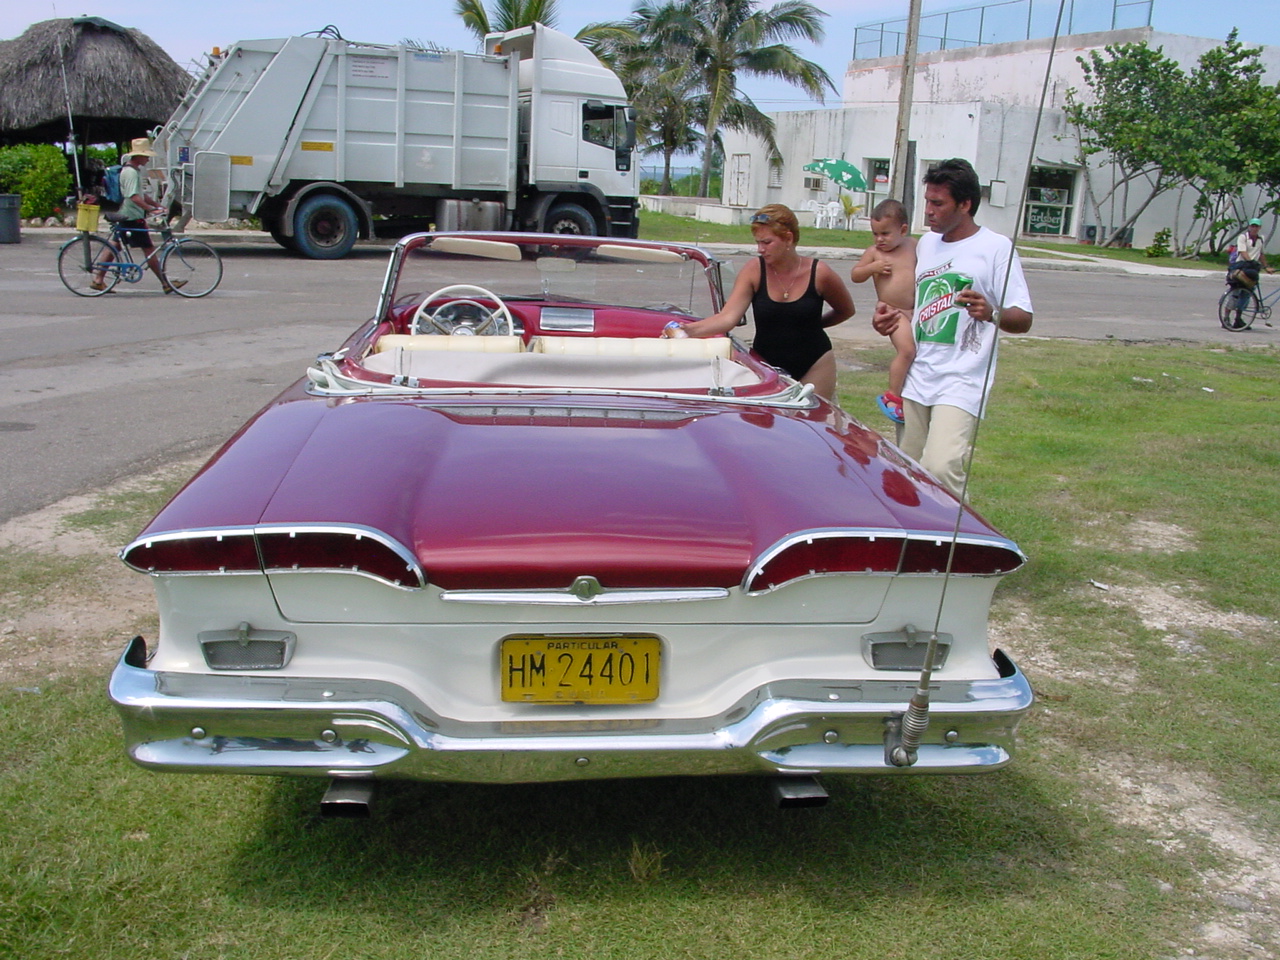 PHOTOS OF VINTAGE AMERICAN CARS IN CUBA - LUMIKA.ORG: TRAVEL